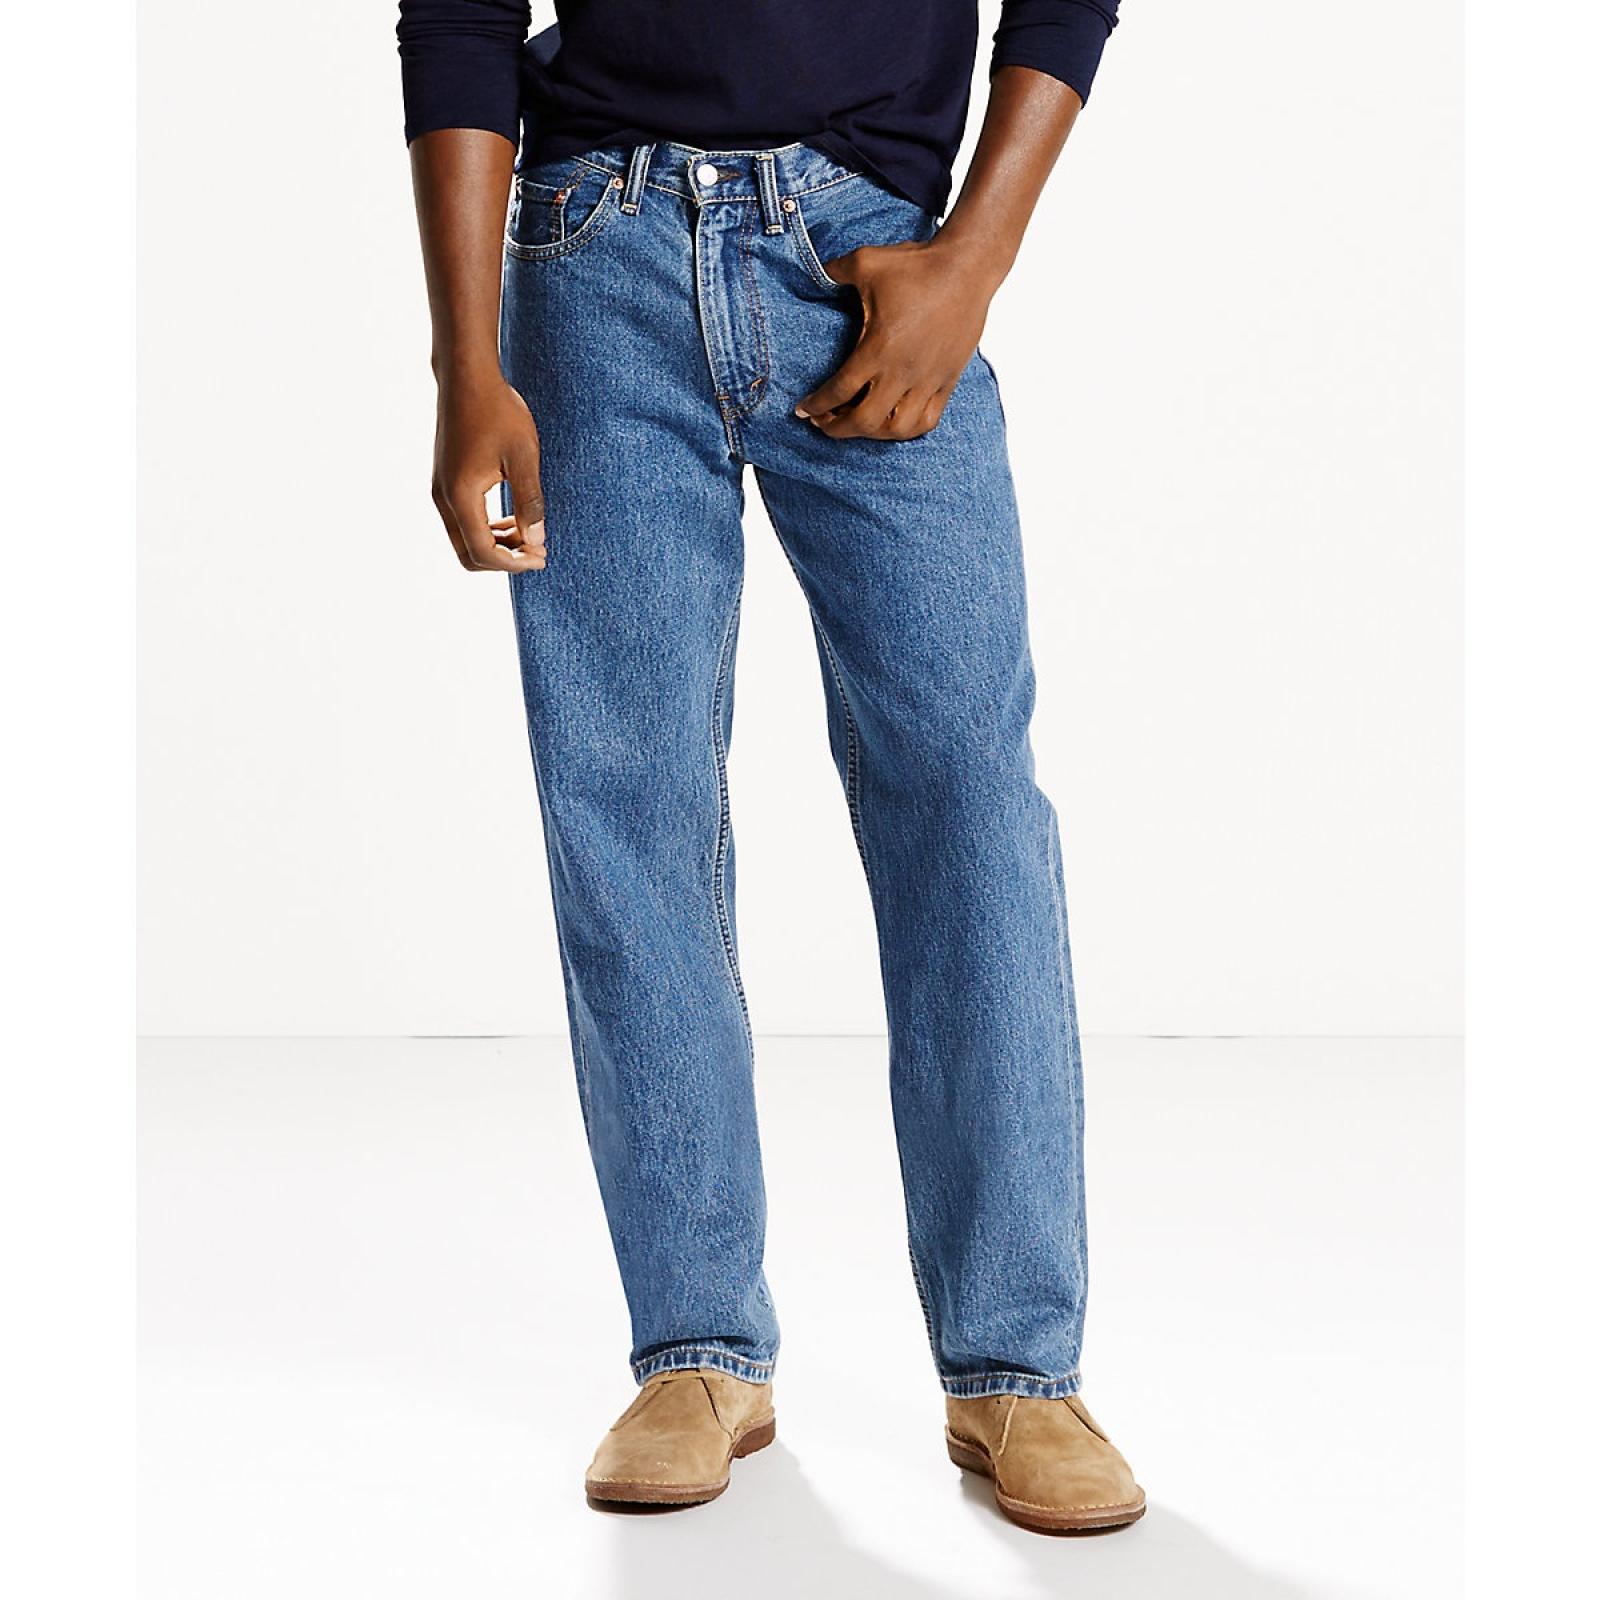 Levi's 550™ Relaxed Fit Men's Jeans